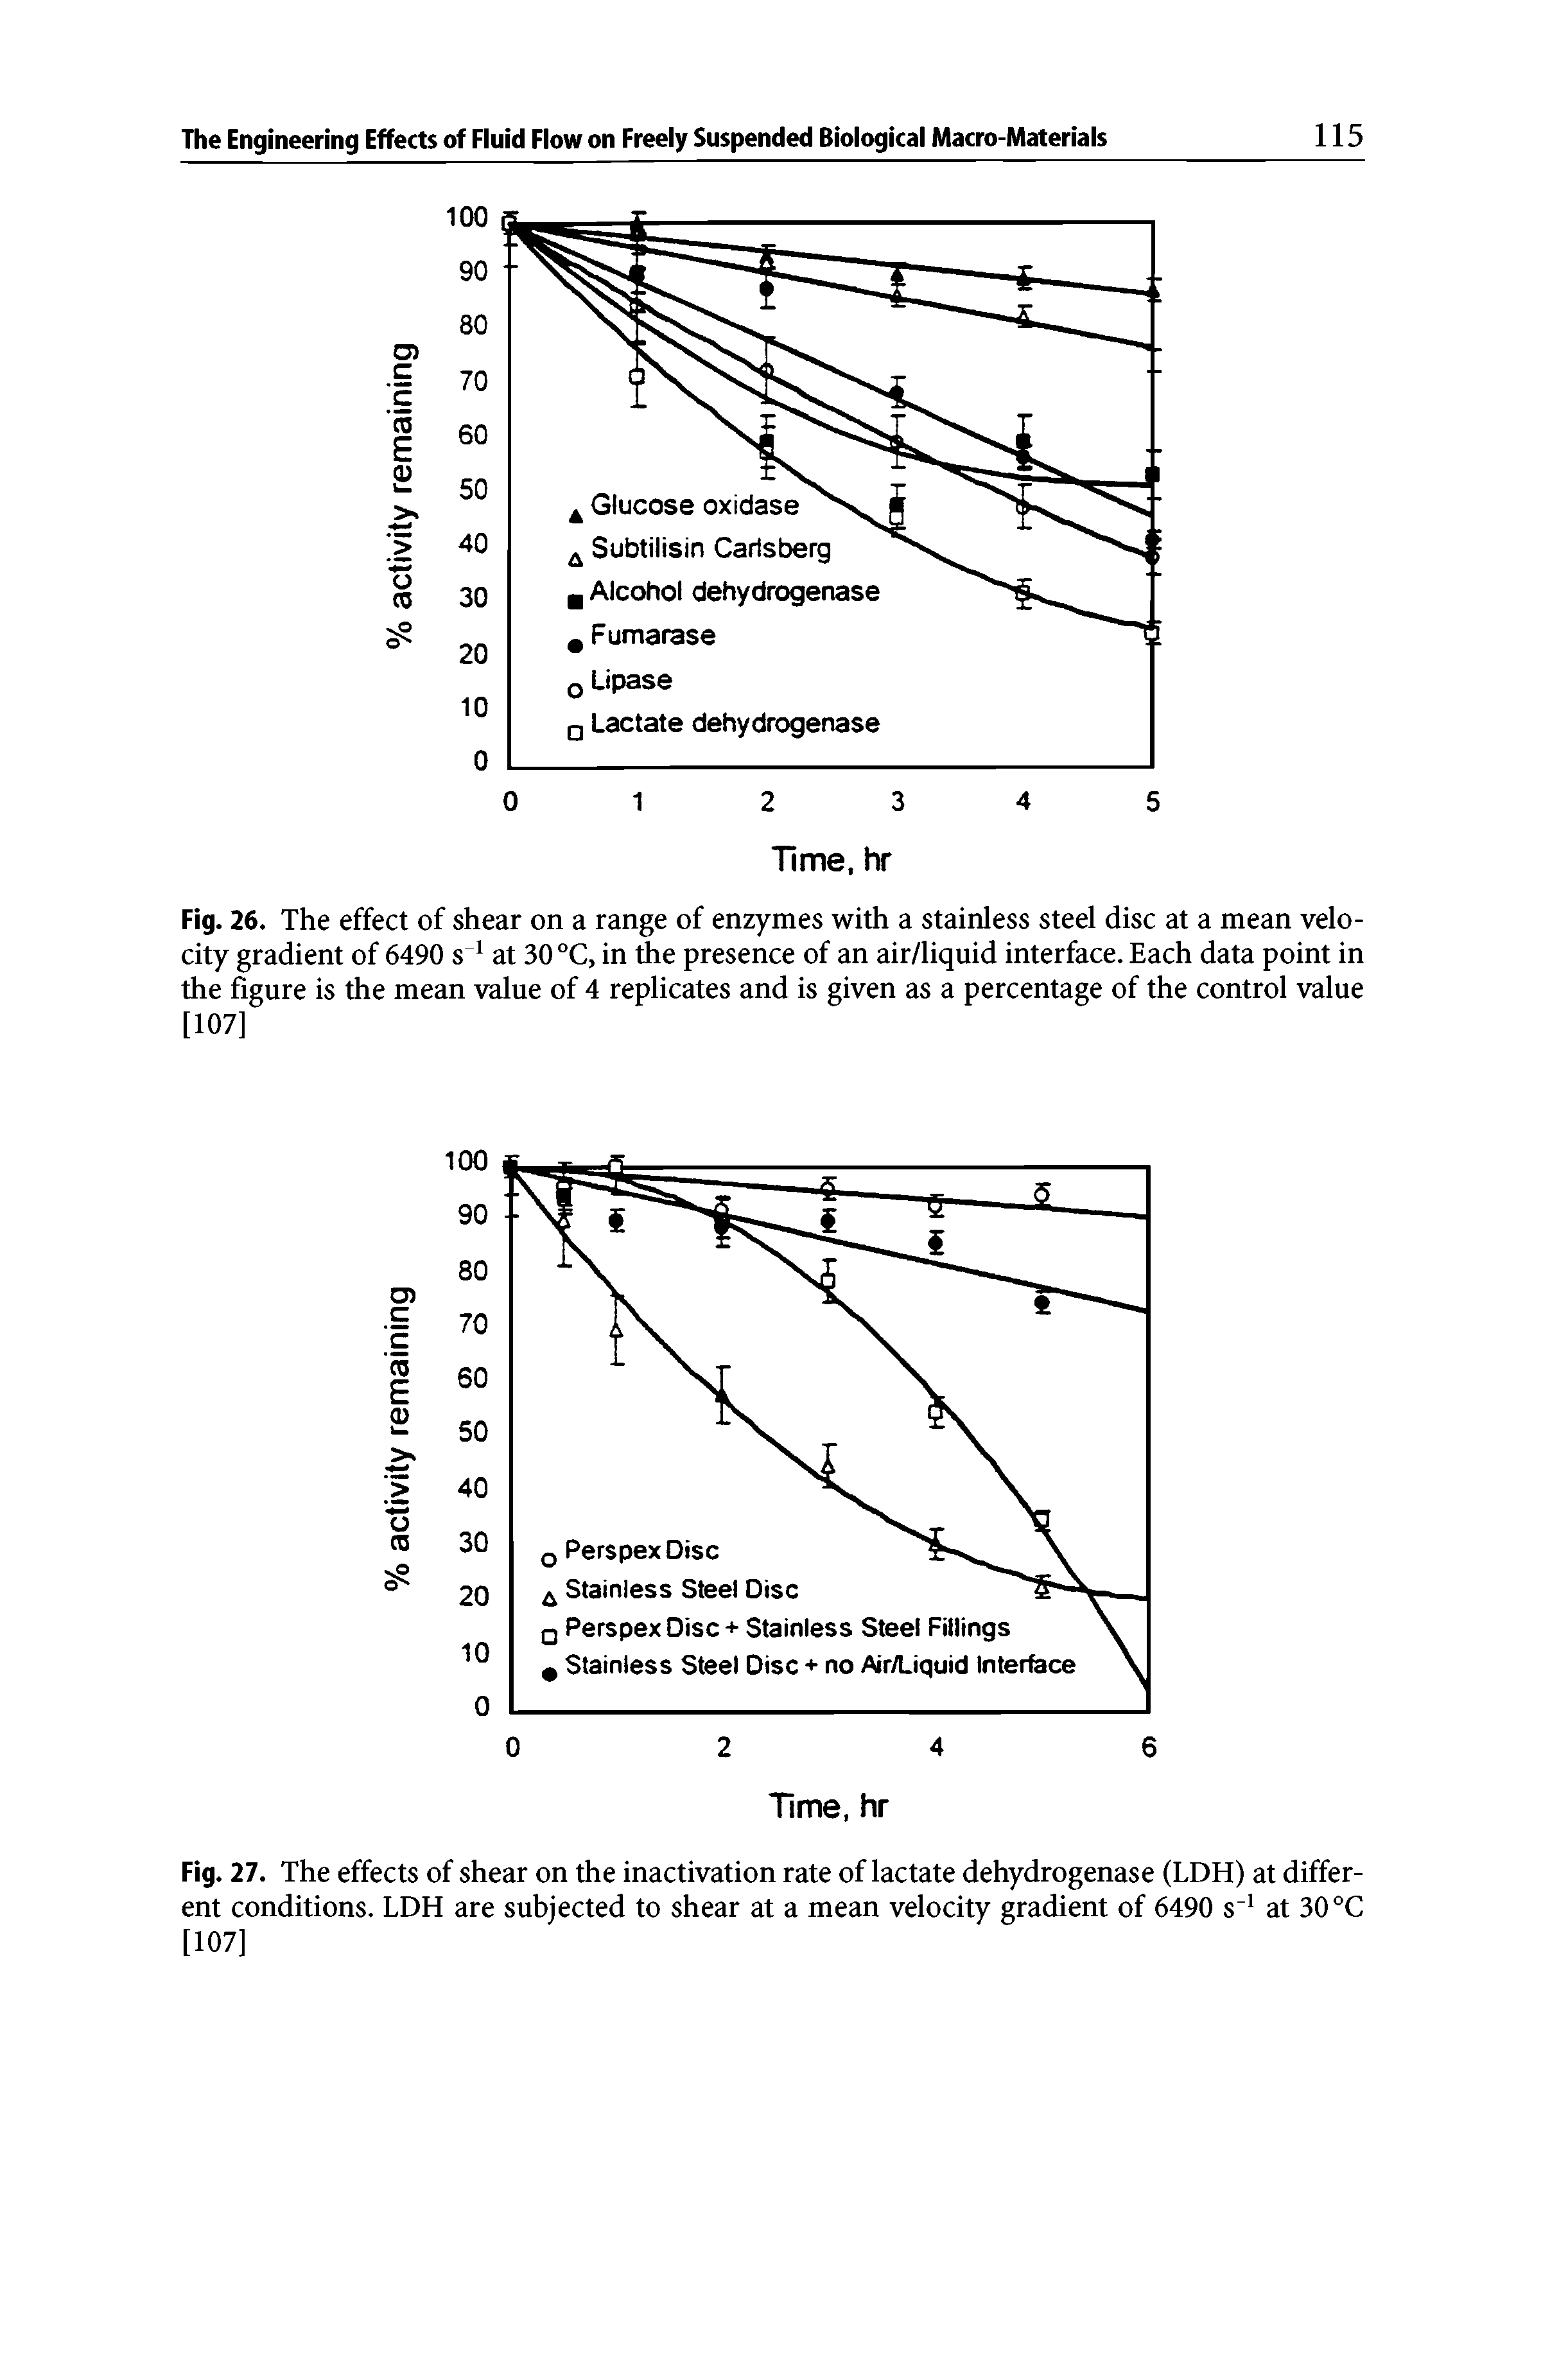 Fig. 26. The effect of shear on a range of enzymes with a stainless steel disc at a mean velocity gradient of 6490 s at 30 °C, in the presence of an air/liquid interface. Each data point in the figure is the mean value of 4 replicates and is given as a percentage of the control value [107]...